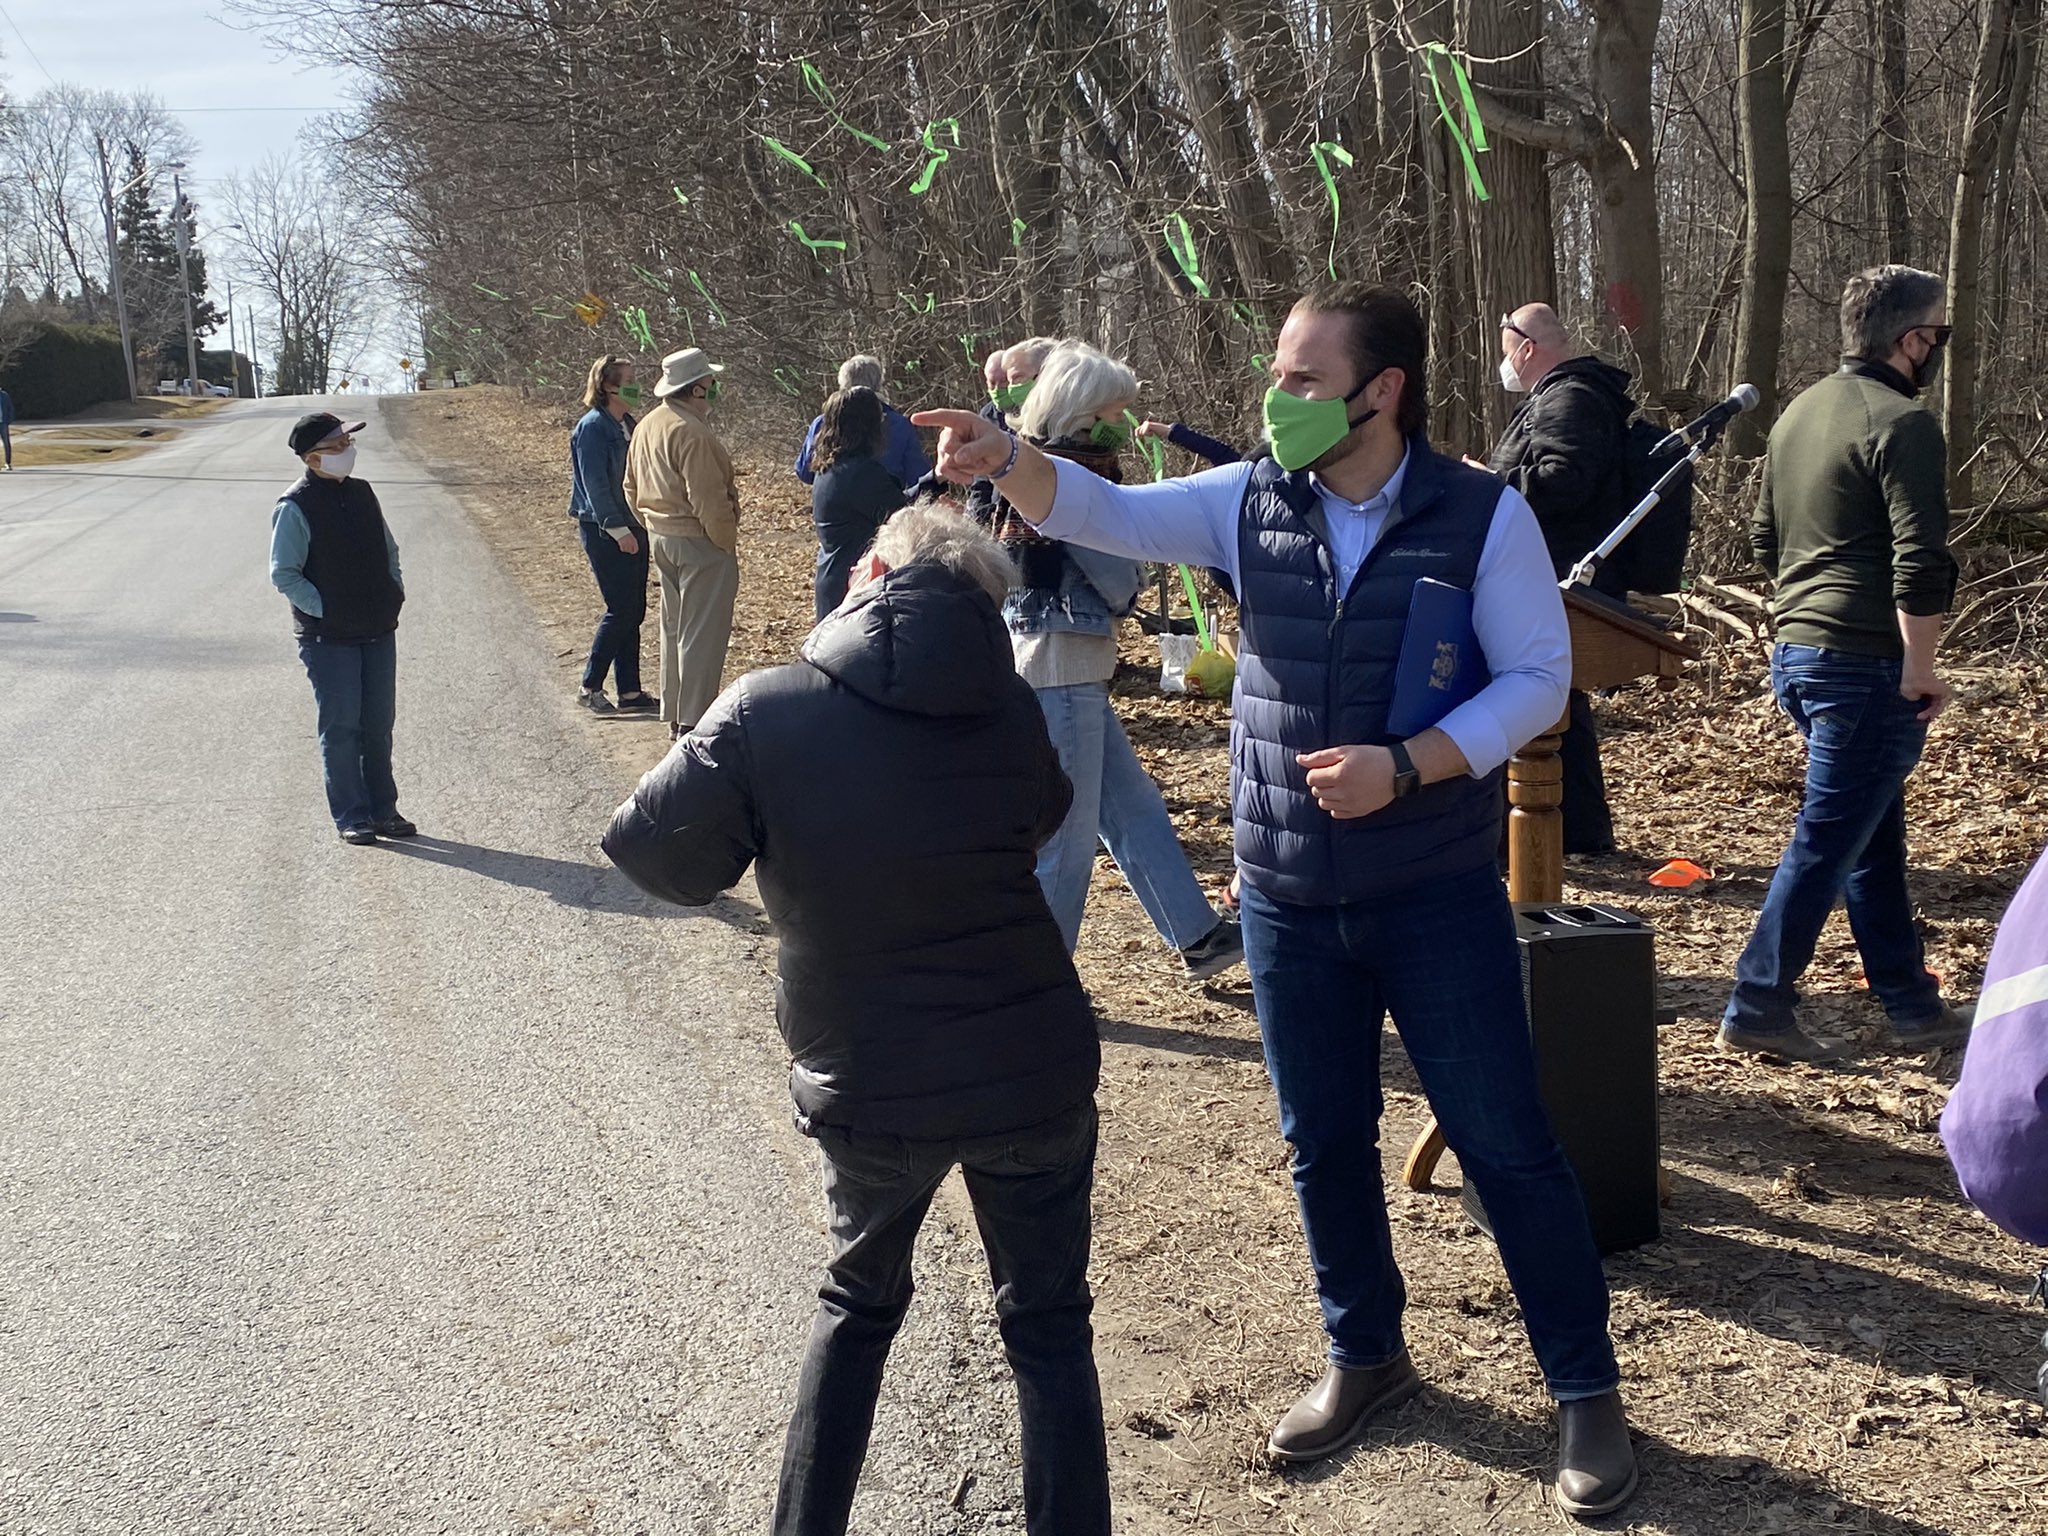 Piccini, wearing jeans and a puffy vest, points off in the distance as he speaks to a person at a protest to save a woodlot. In the background, more attendees are visible in front of trees with green ribbons tied to them.